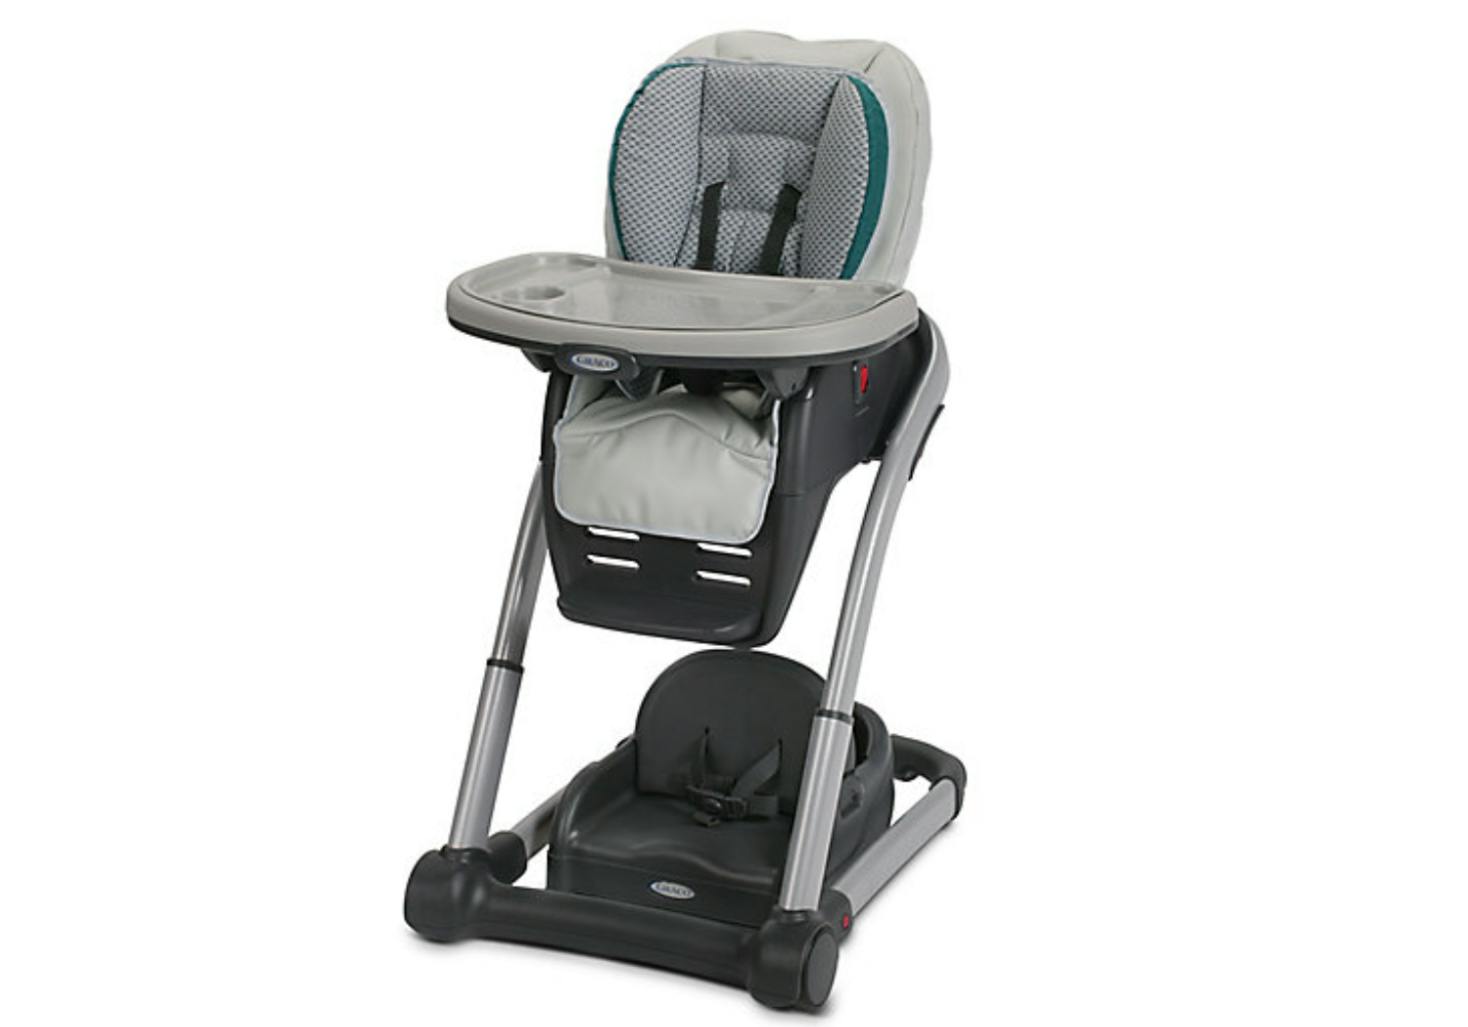 The Graco Blossom 6-in-1 Convertible High Chair.